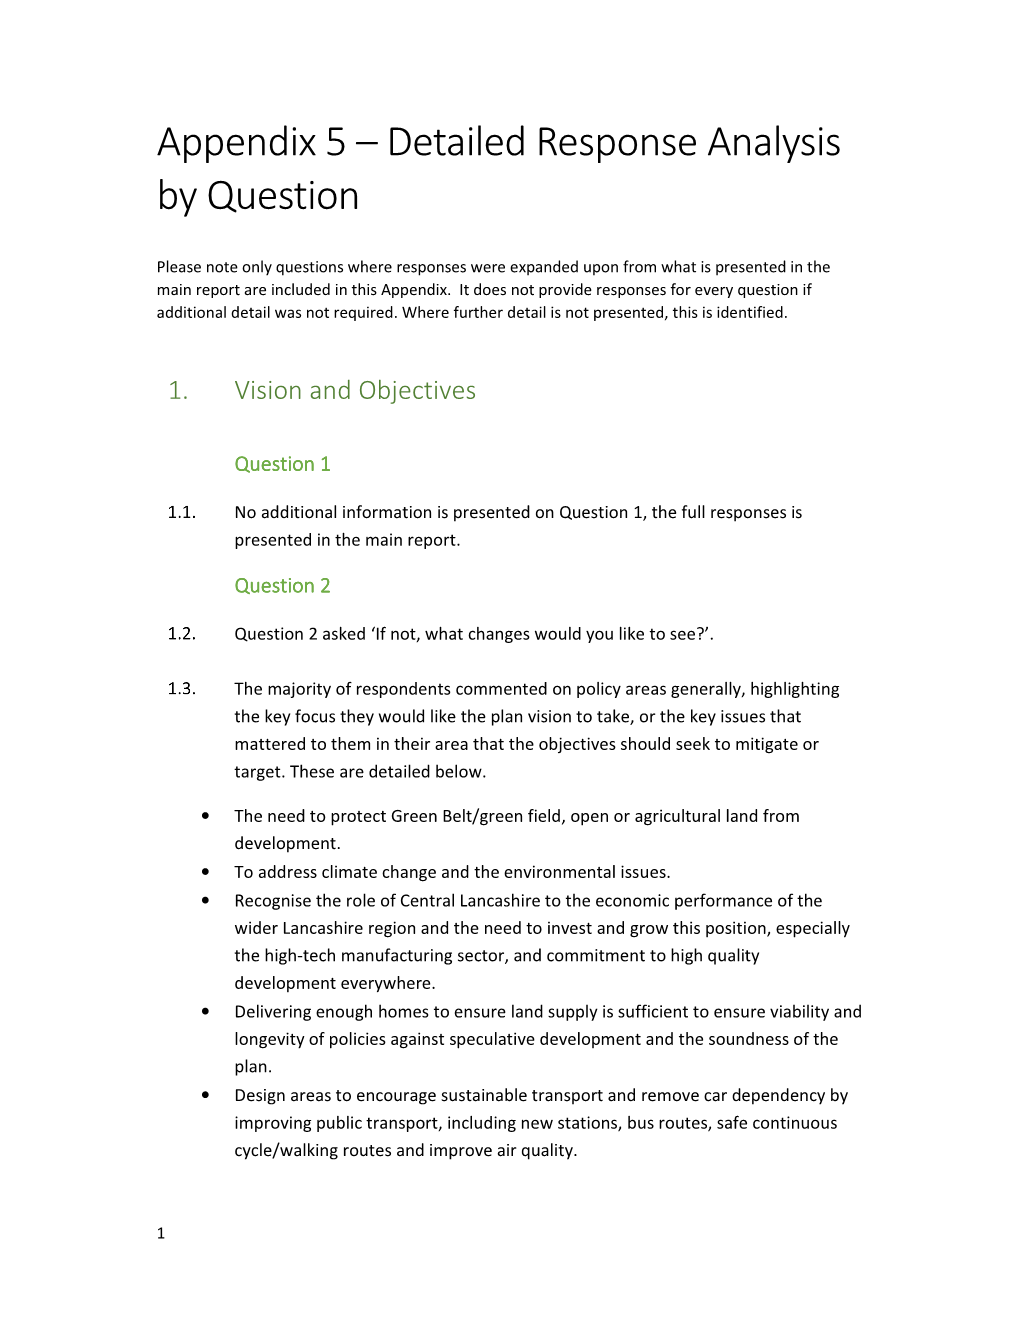 Appendix 5 – Detailed Response Analysis by Question